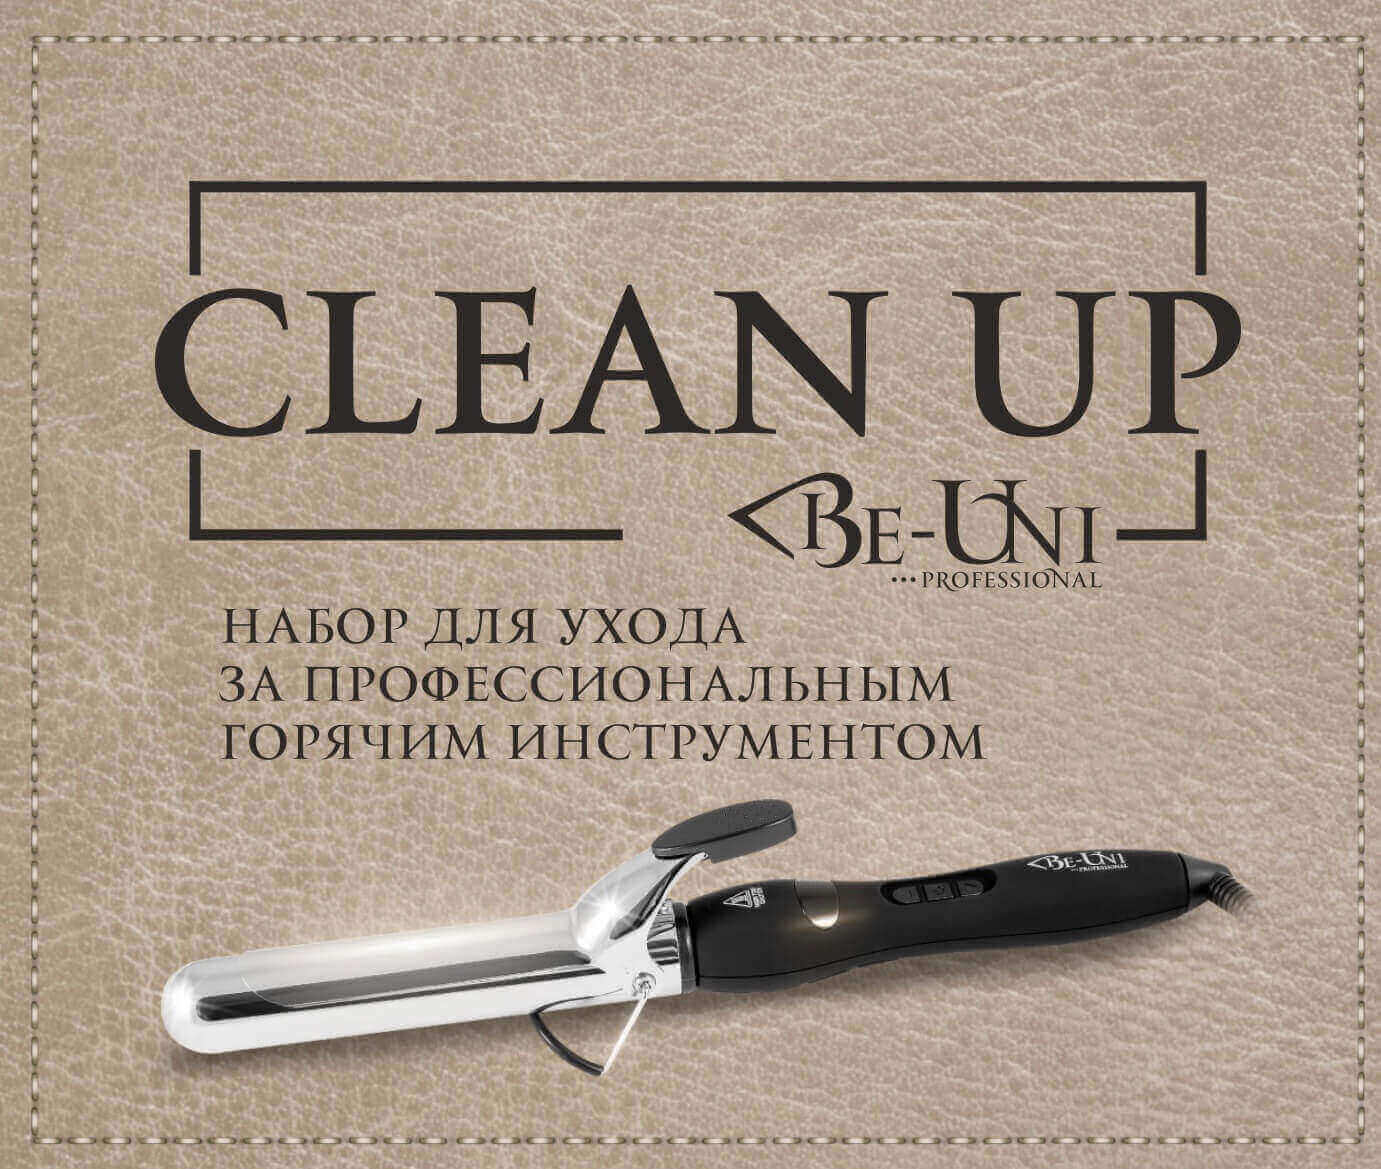       Clean Up BE-UNI BE2020